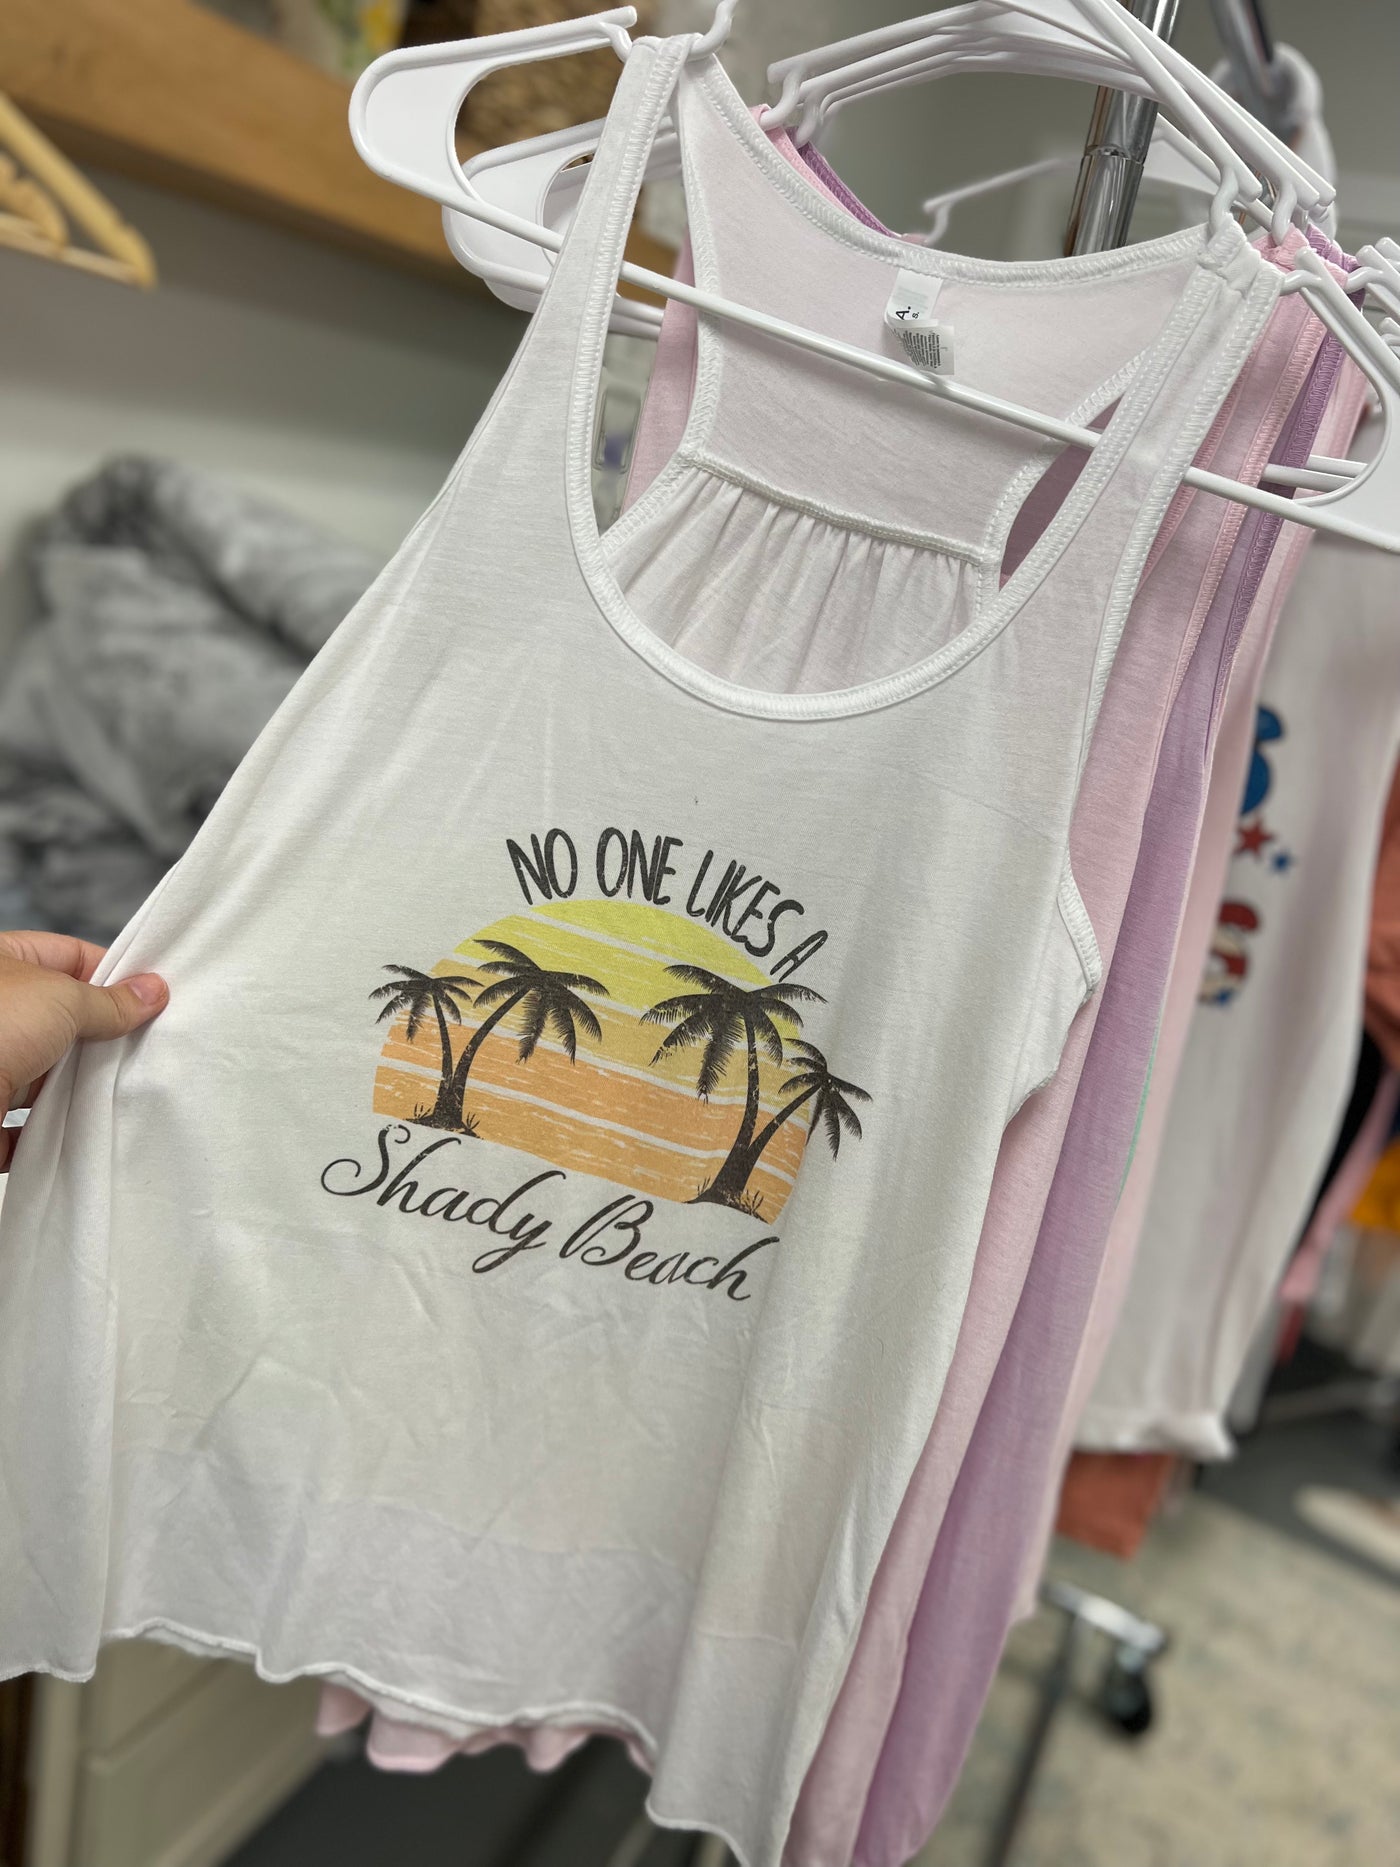 CLEARANCE: Size Large "No One Likes a Shady Beach" Bella Canvas Tank